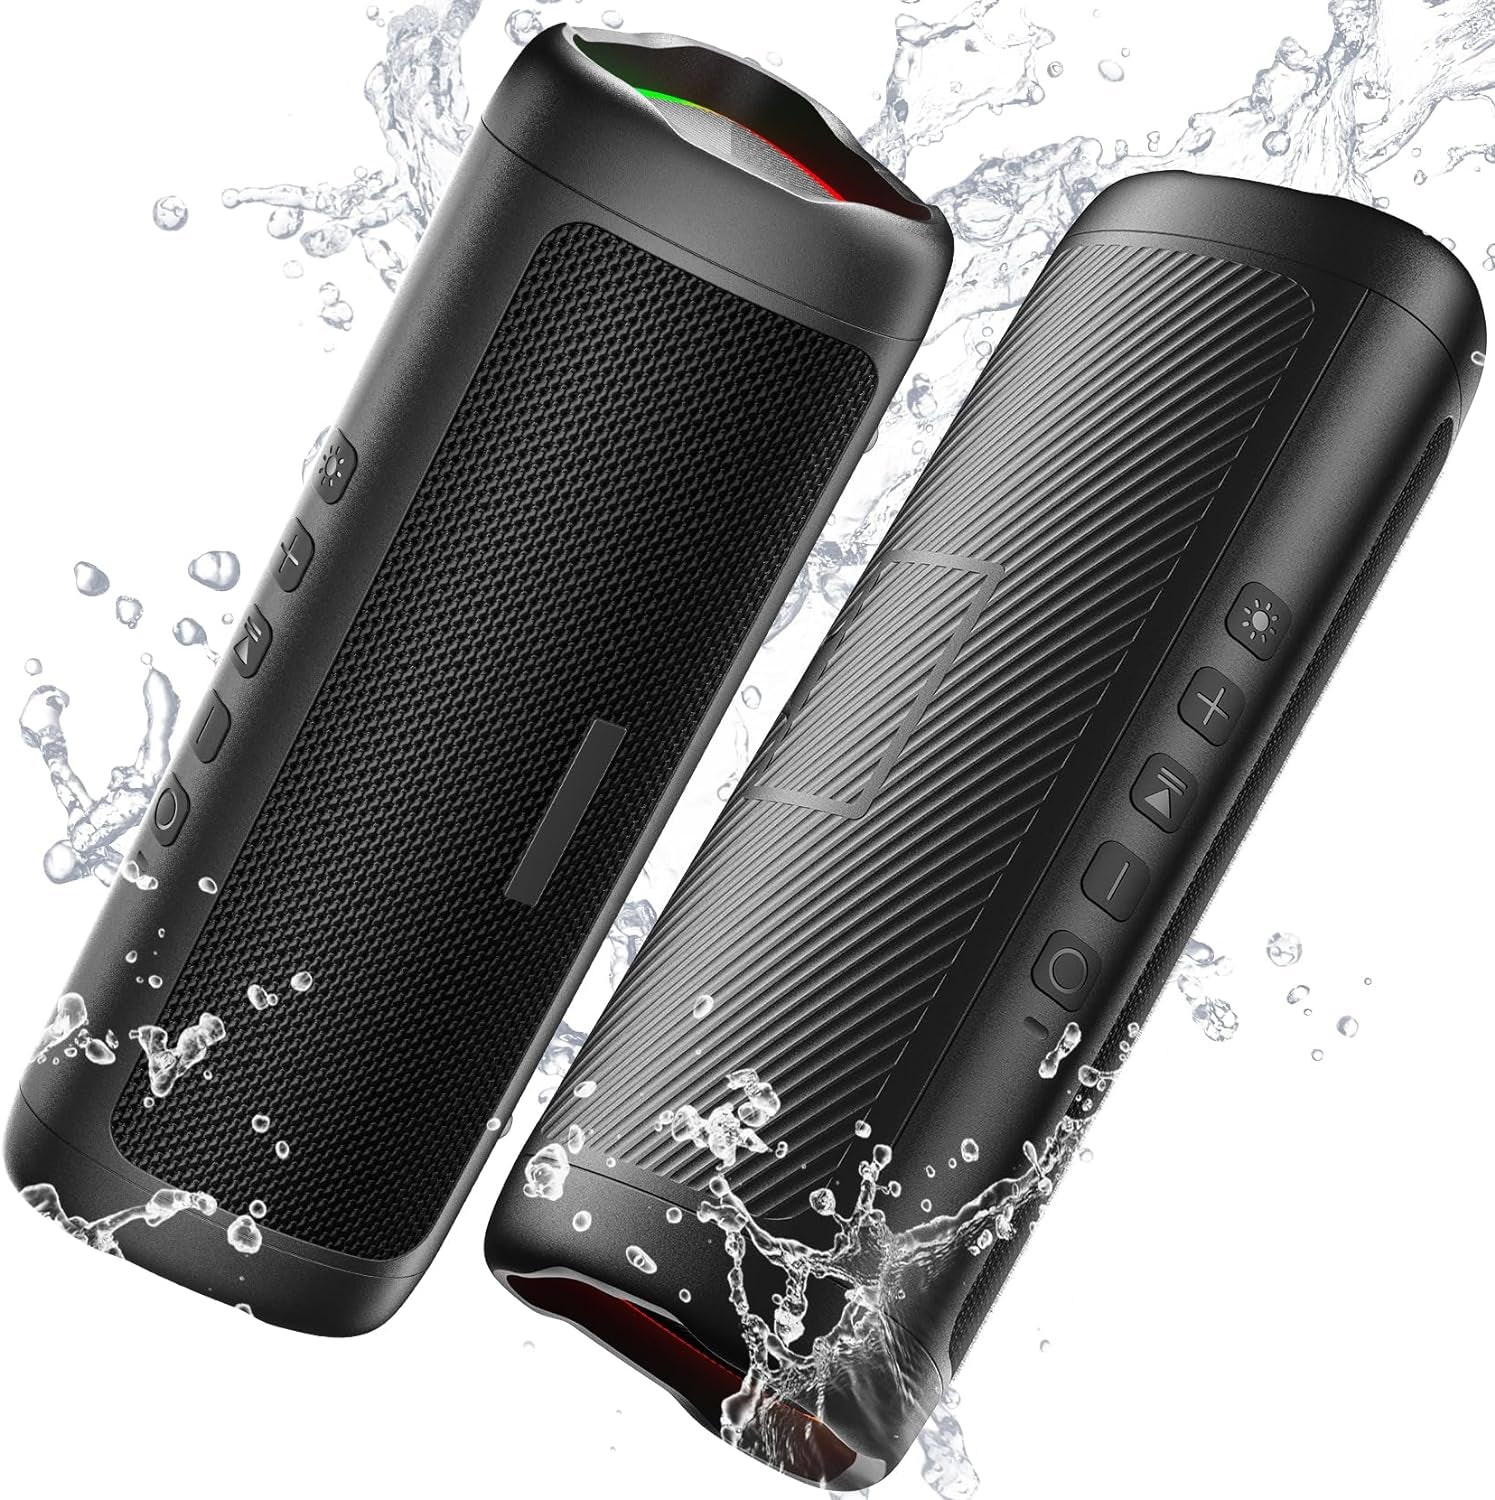 Bluetooth Speaker with HD Sound, Portable Wireless, IPX5 Waterproof, up to 24H Playtime, TWS Pairing, BT5.3, for Home/Party/Outdoor/Beach, Electronic Gadgets, Birthday Gift (Black)